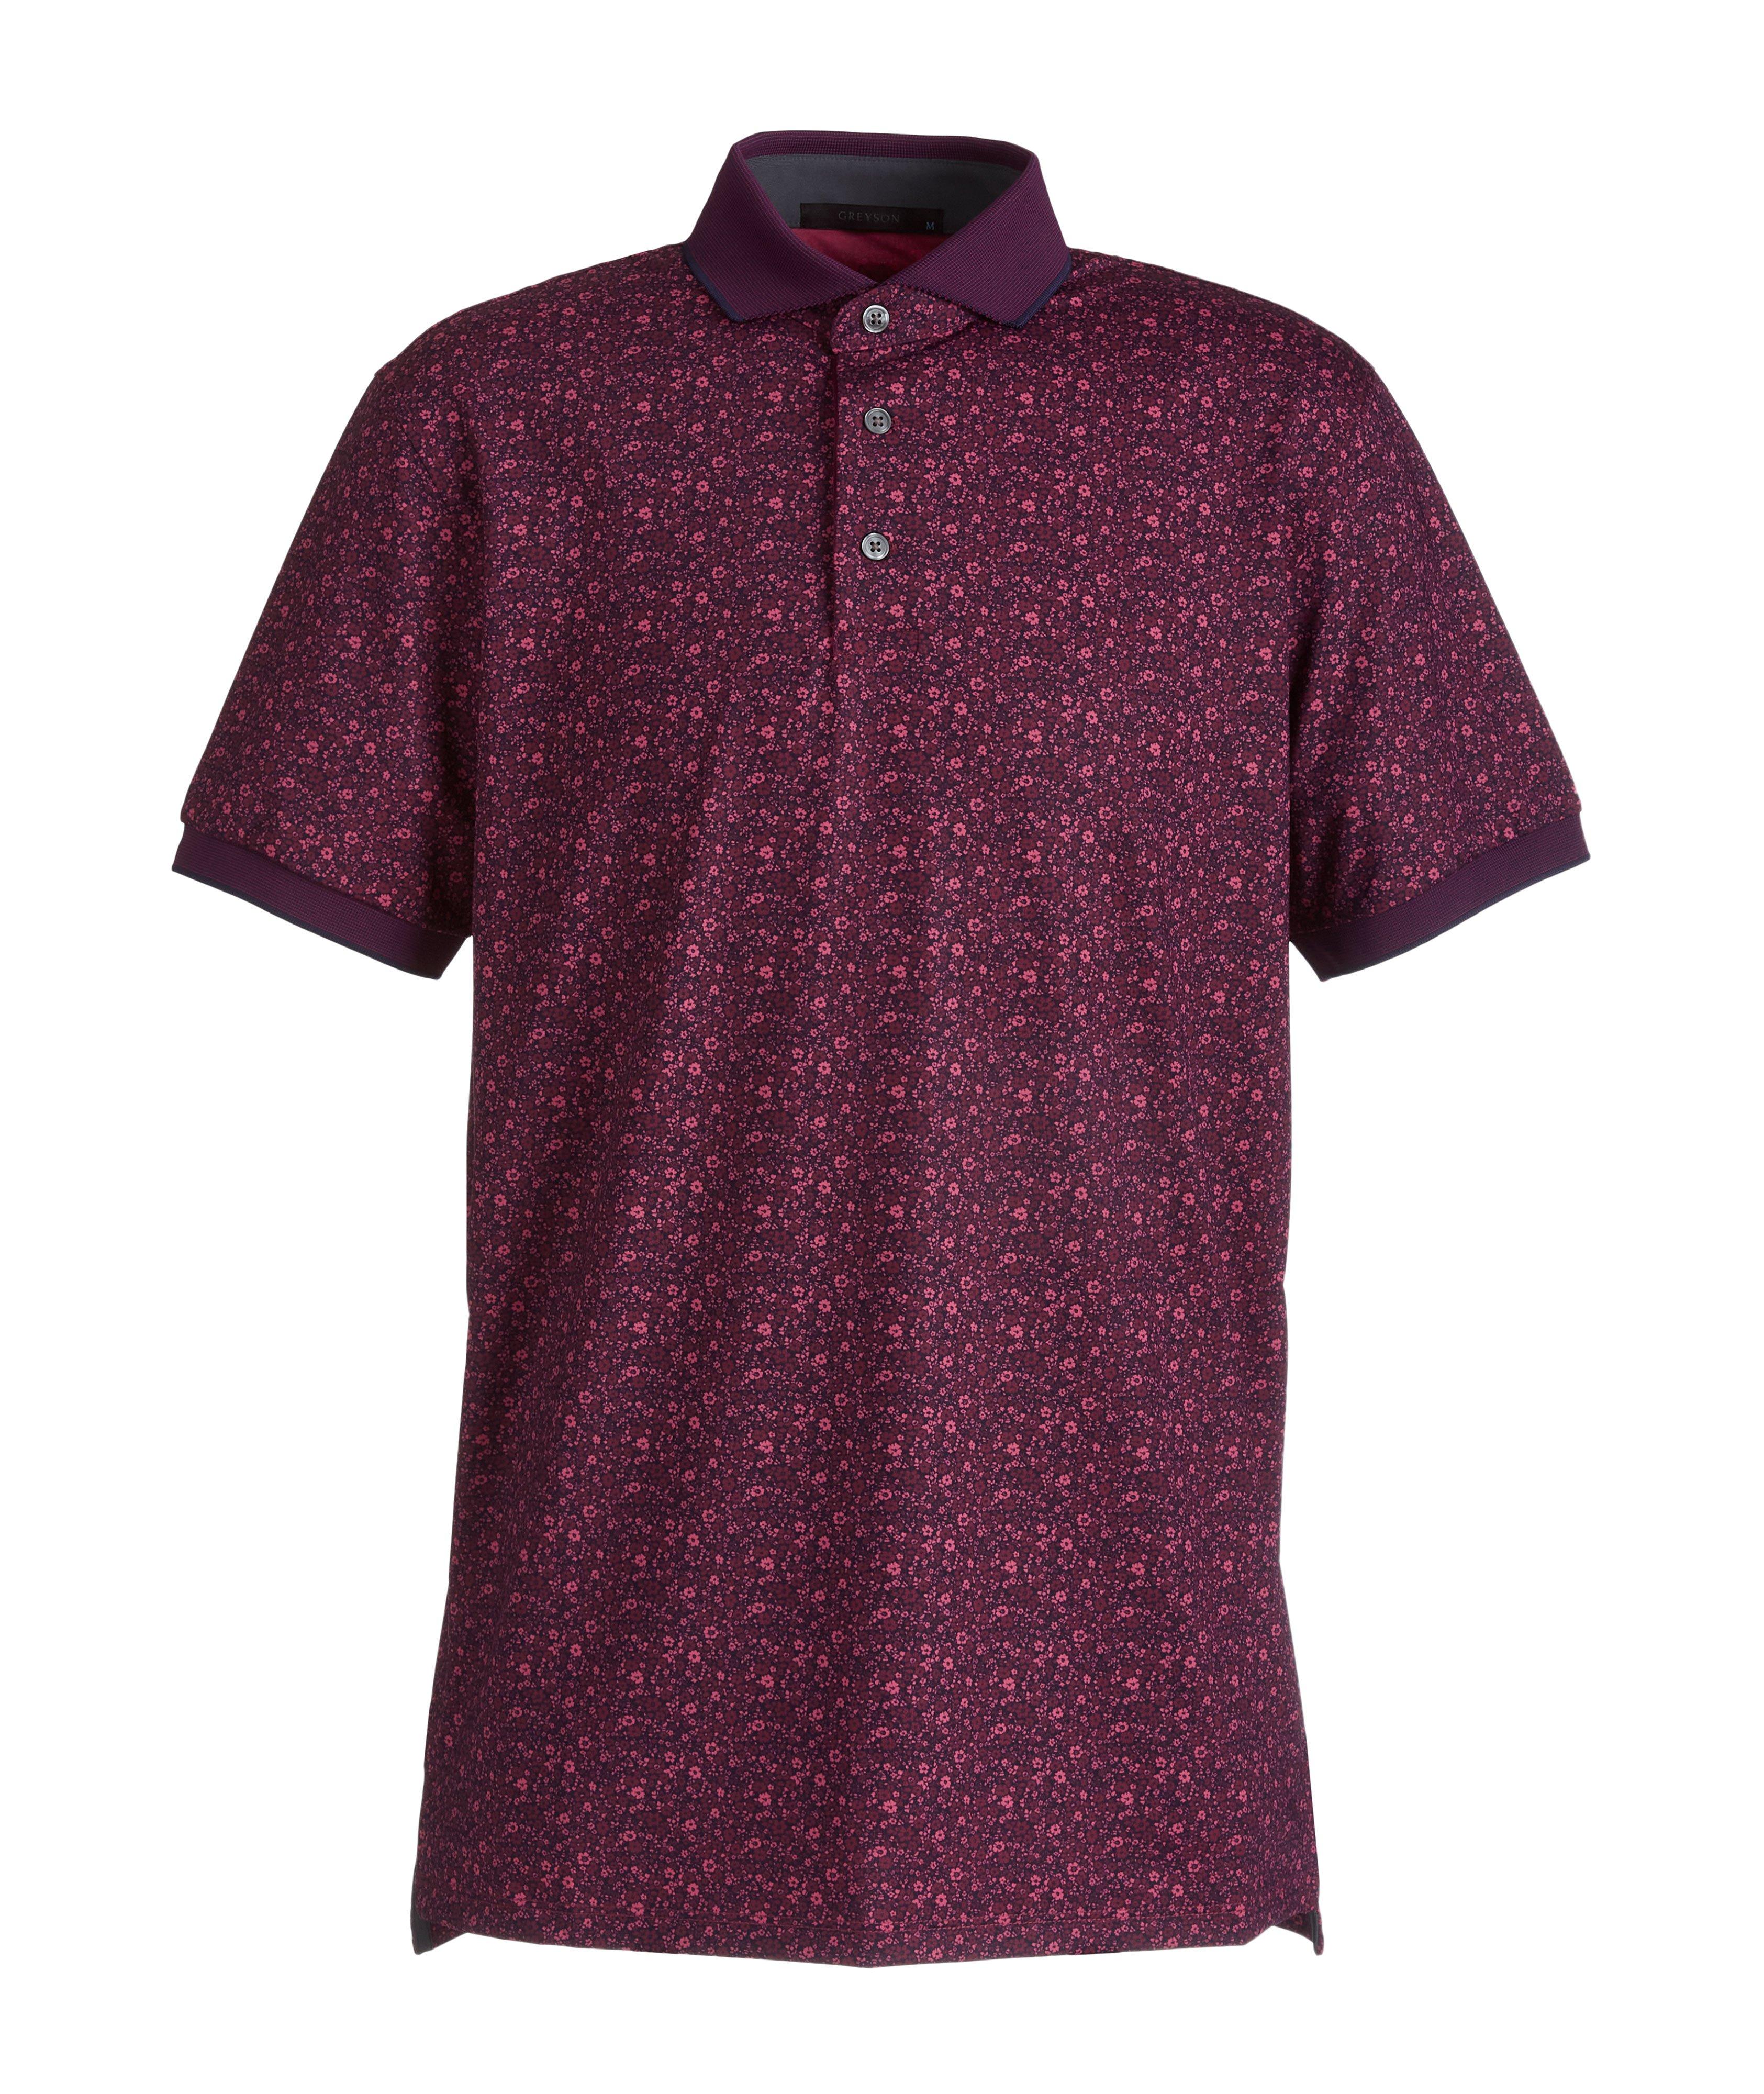 Floral Printed Technical-Stretch Polo  image 0